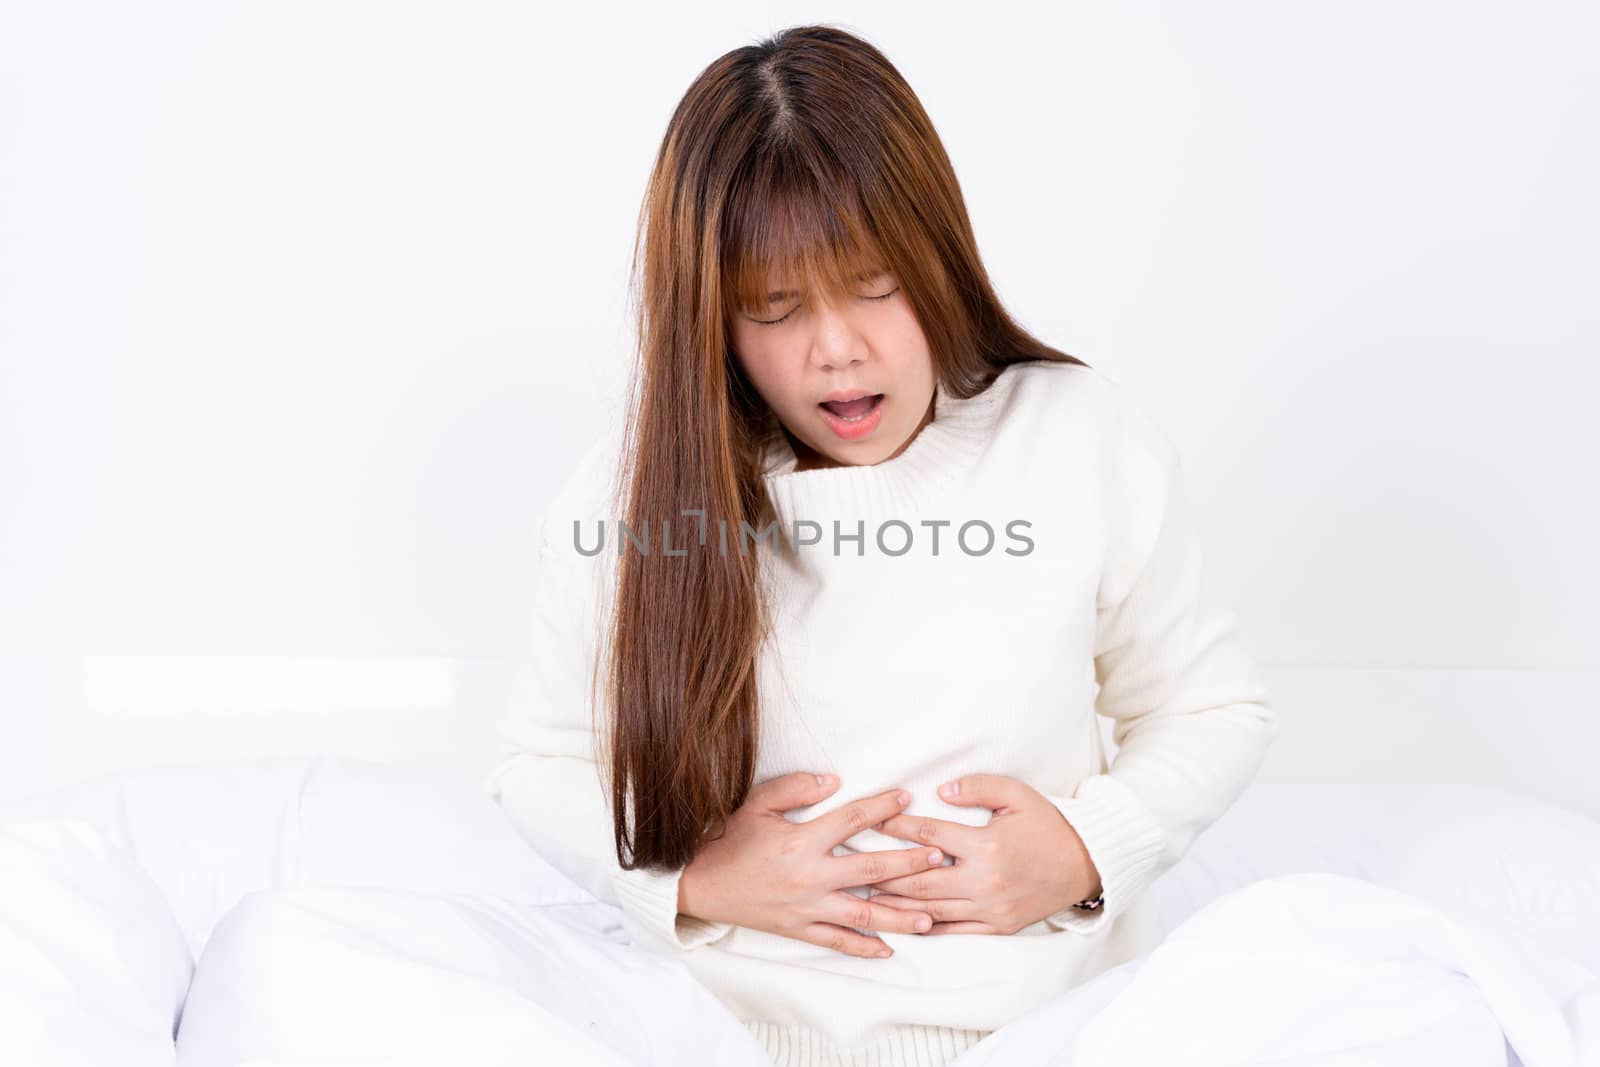 Young woman suffering stomach aches lying on the bed. Healthcare medical or daily life concept. by mikesaran